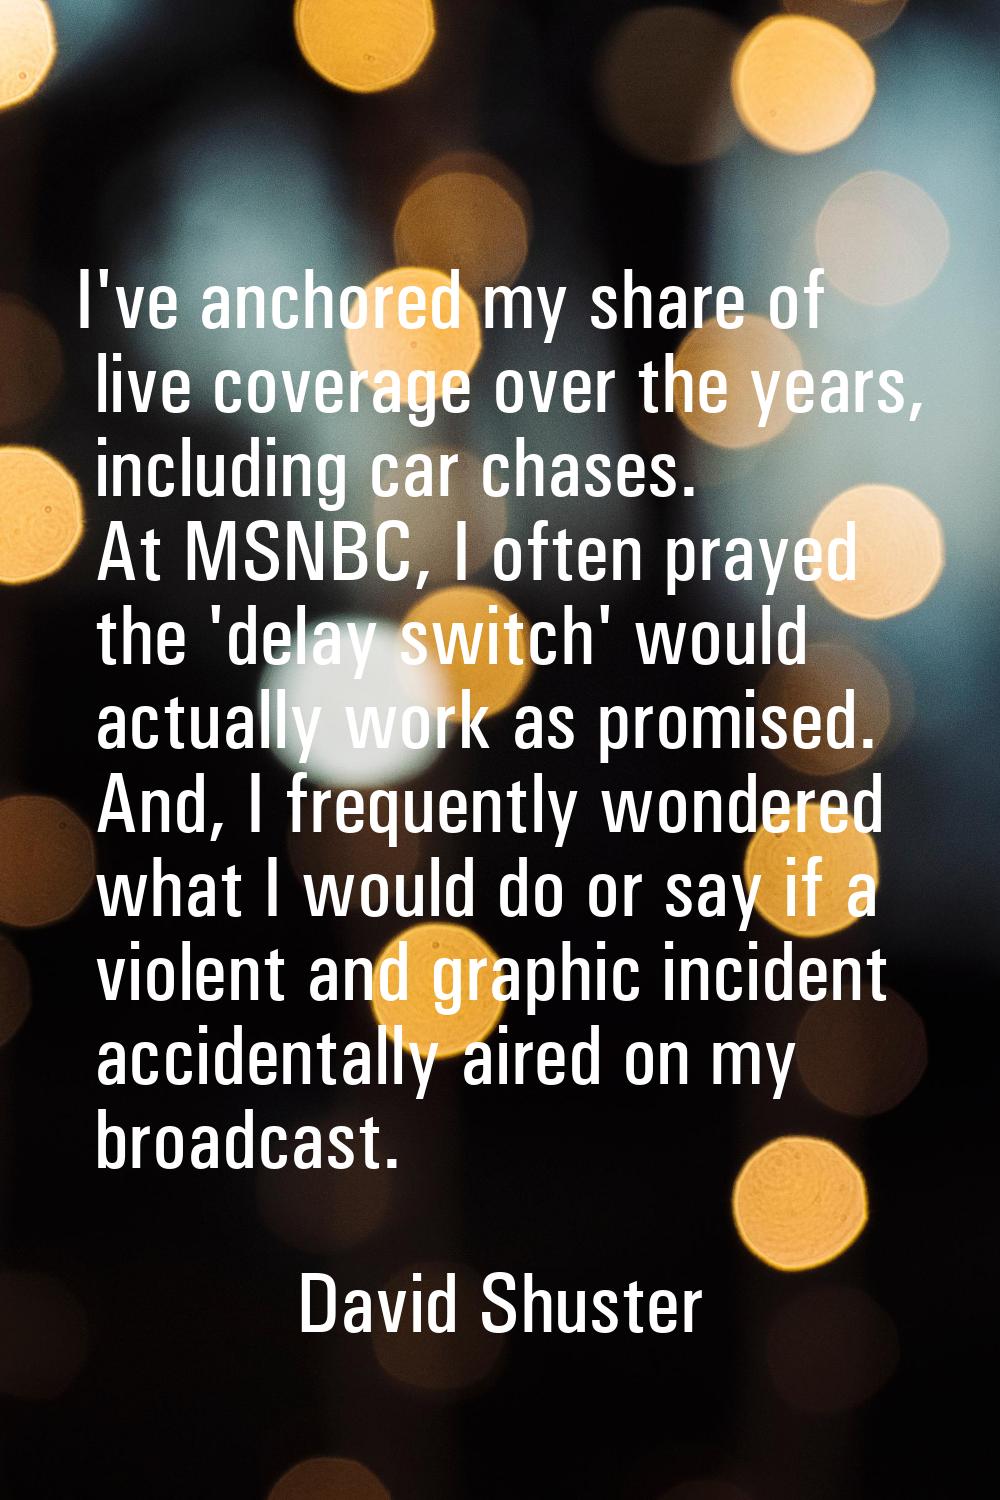 I've anchored my share of live coverage over the years, including car chases. At MSNBC, I often pra